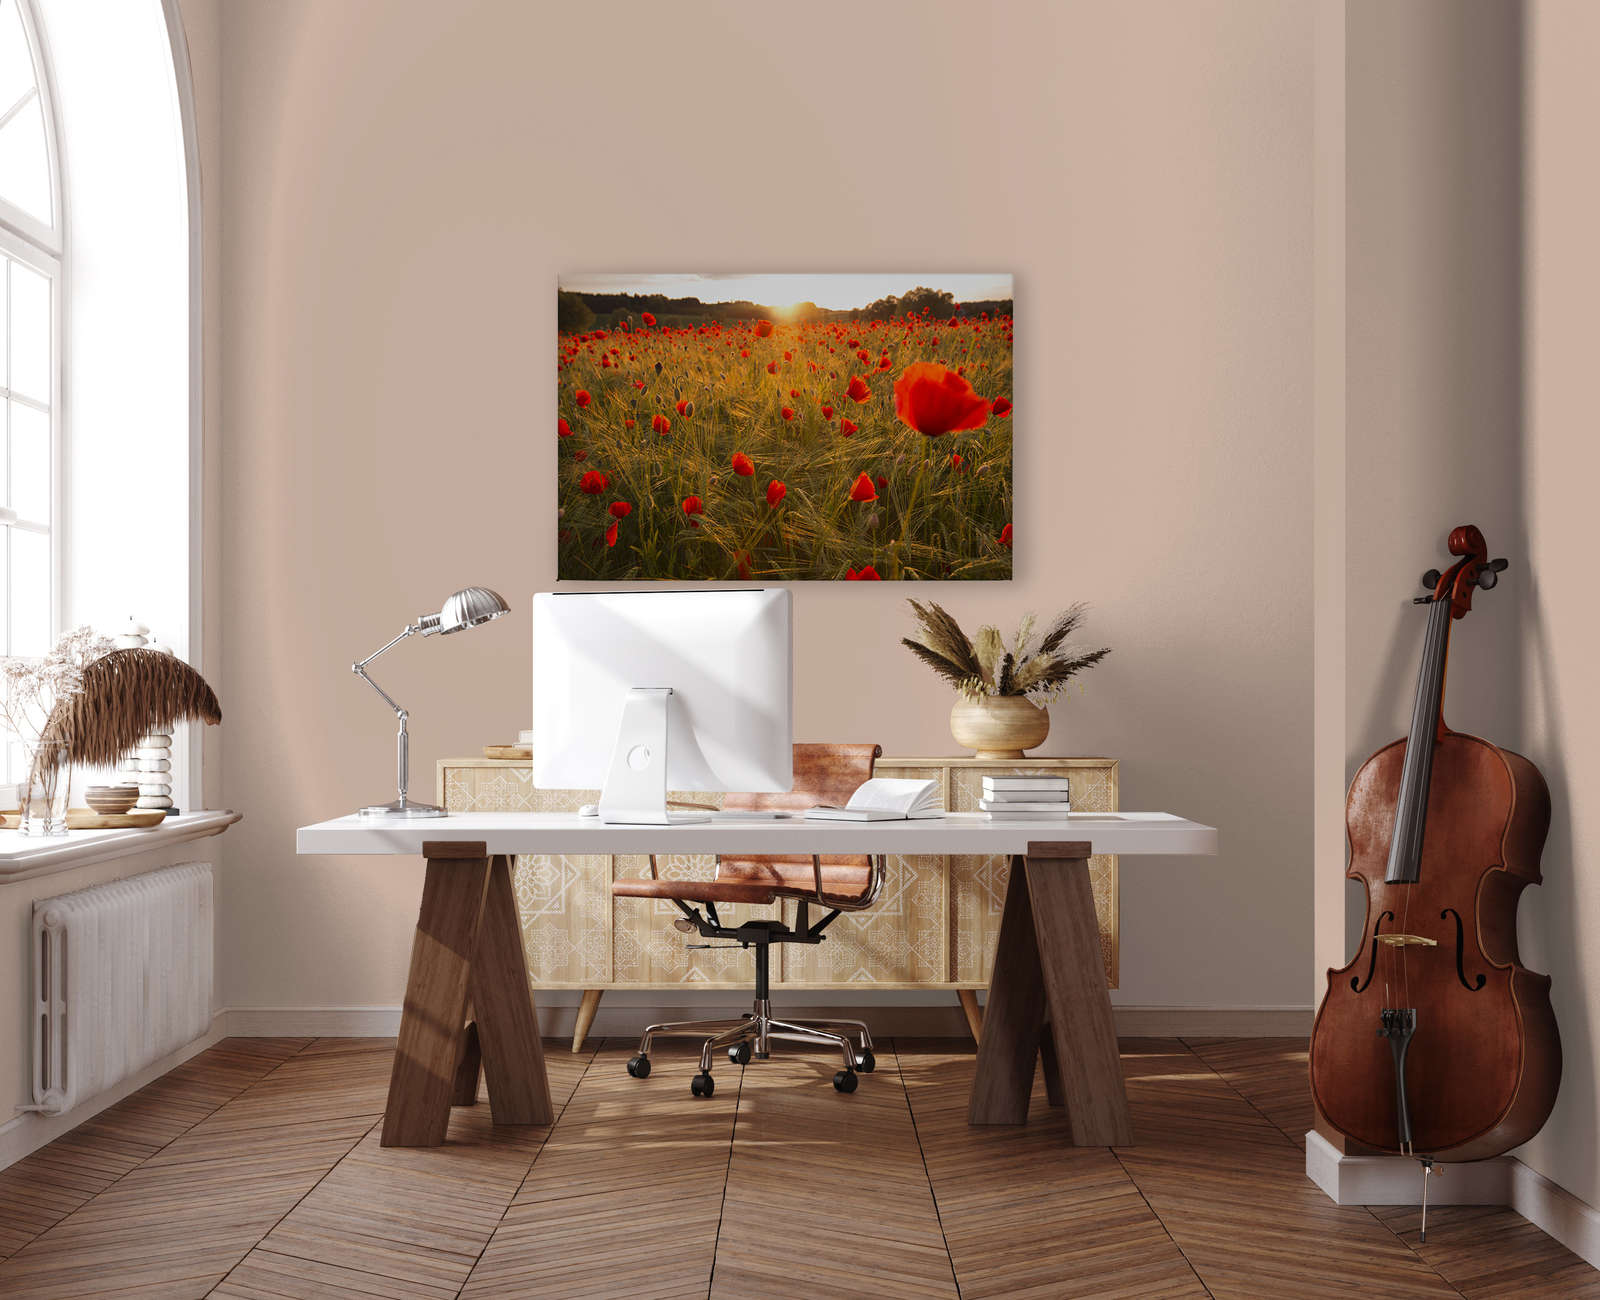             Poppy Meadow Canvas Painting at Sunrise - 1.20 m x 0.80 m
        